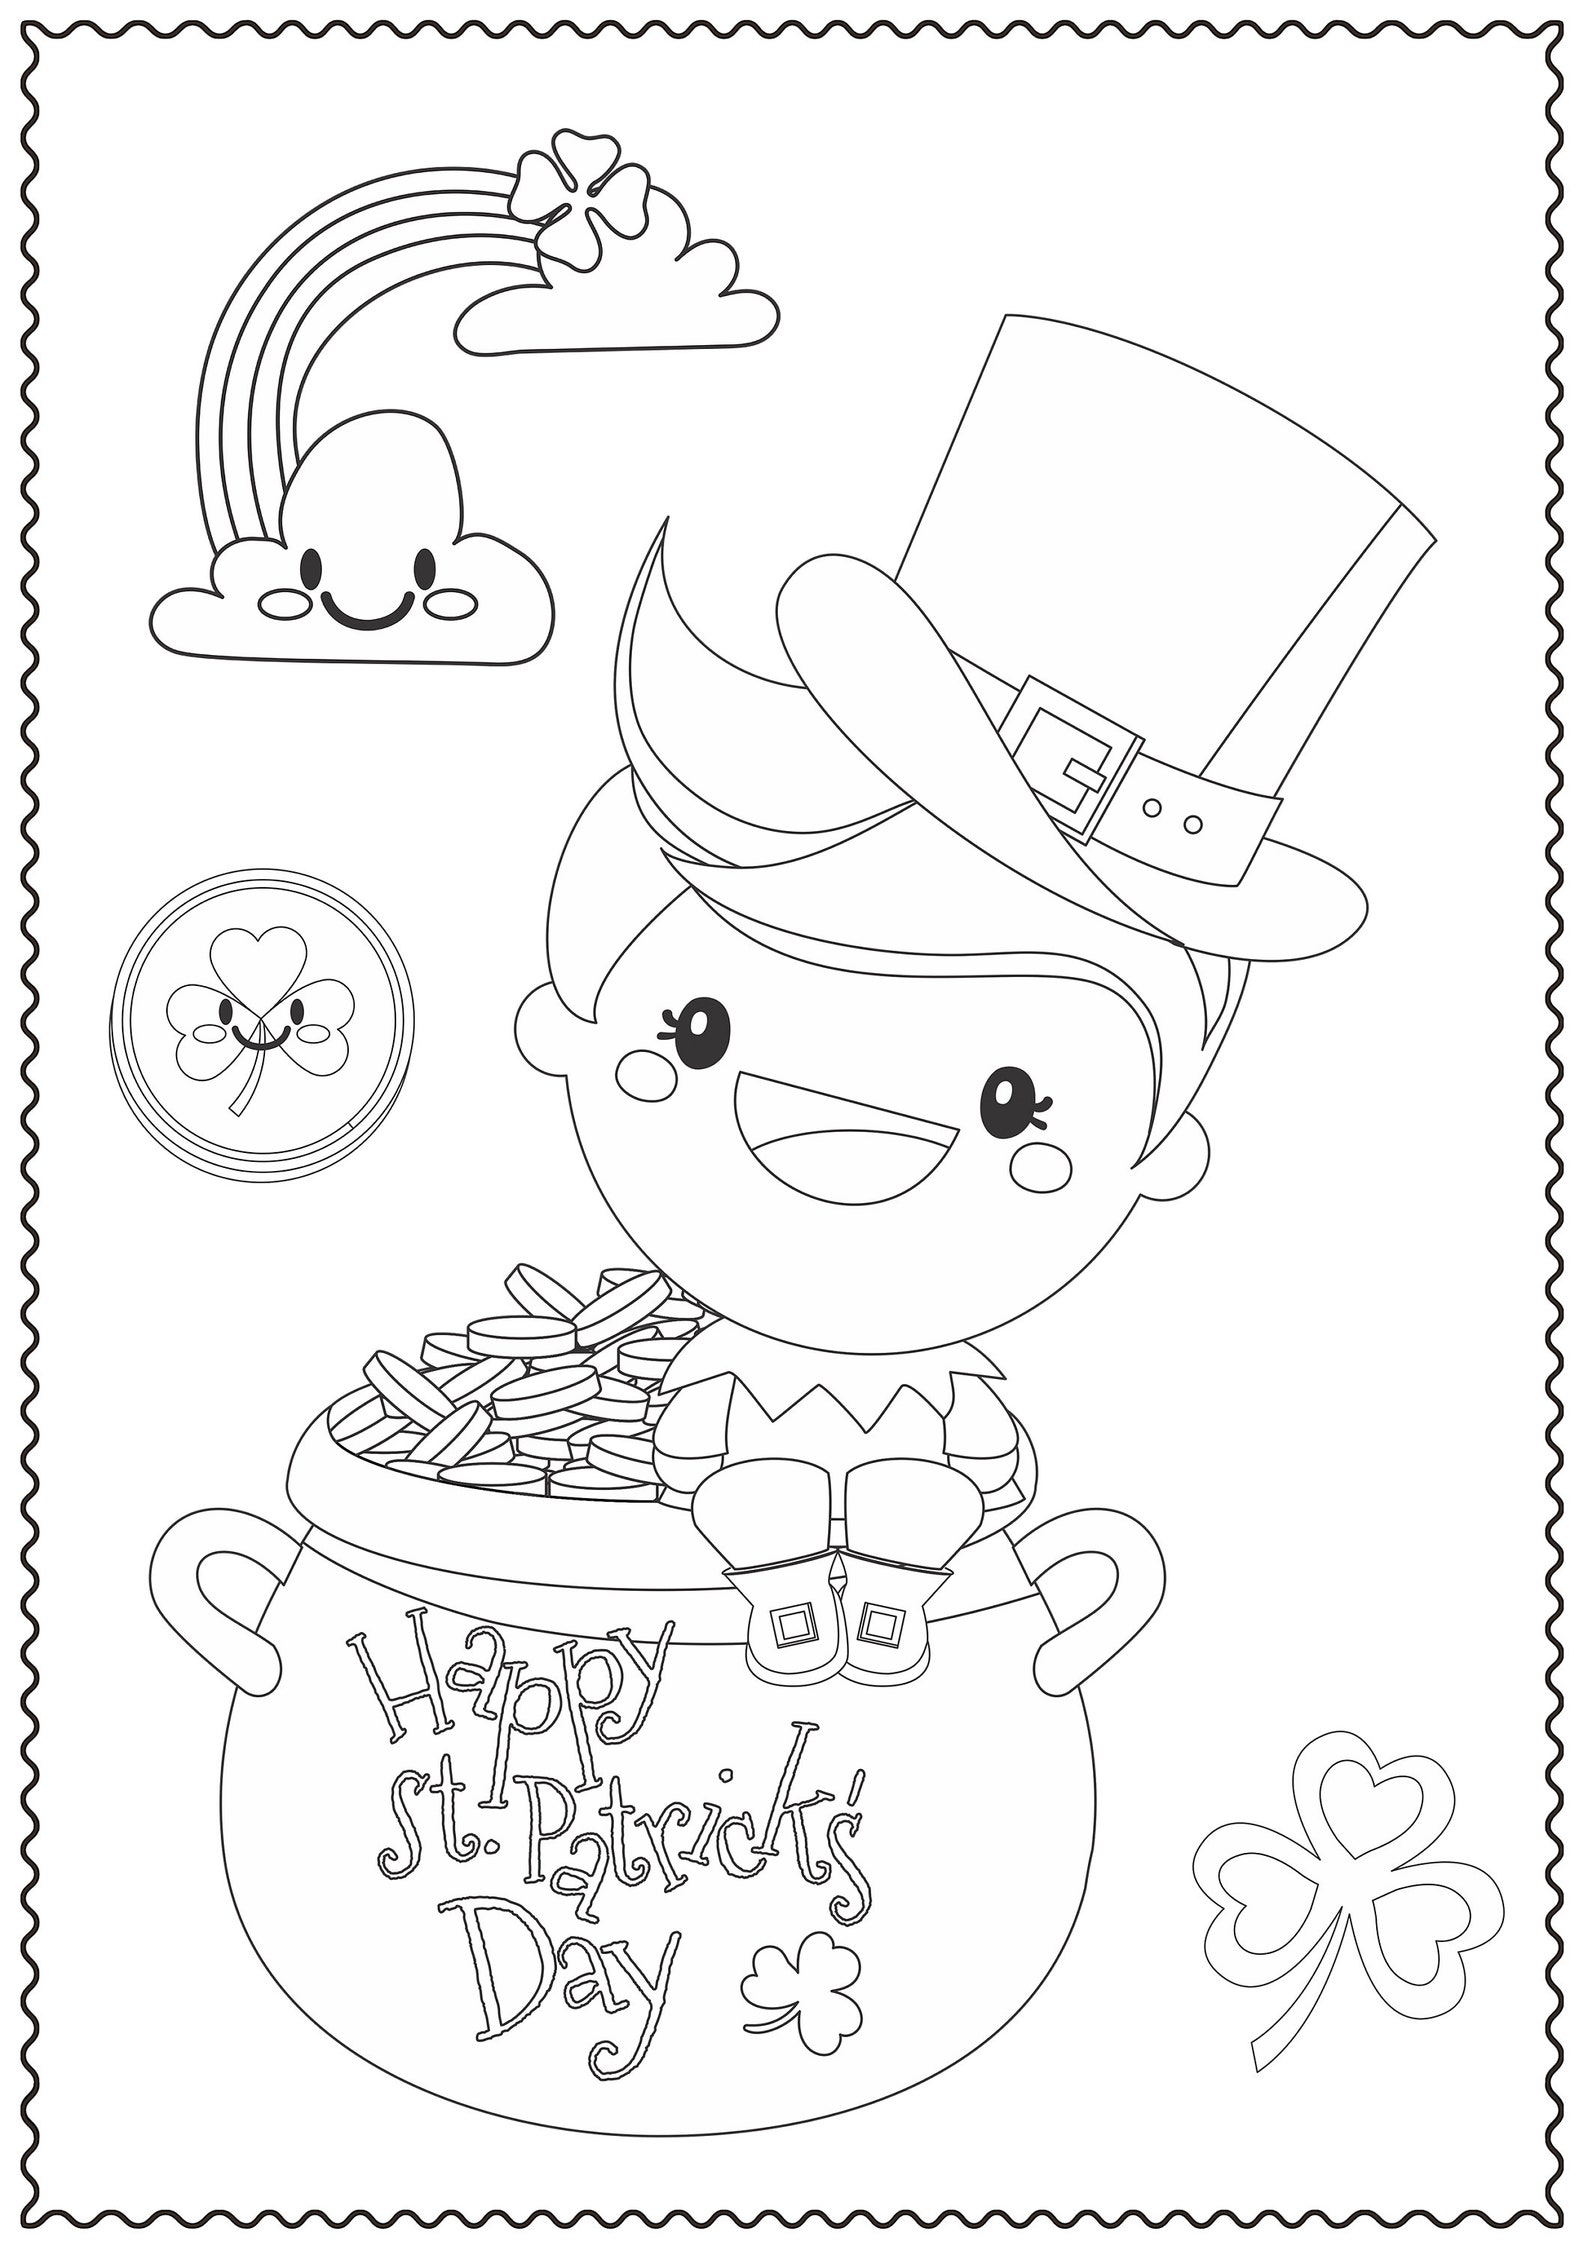 St Patrick's Day Coloring Pages for Kids St Patricks Day Etsy